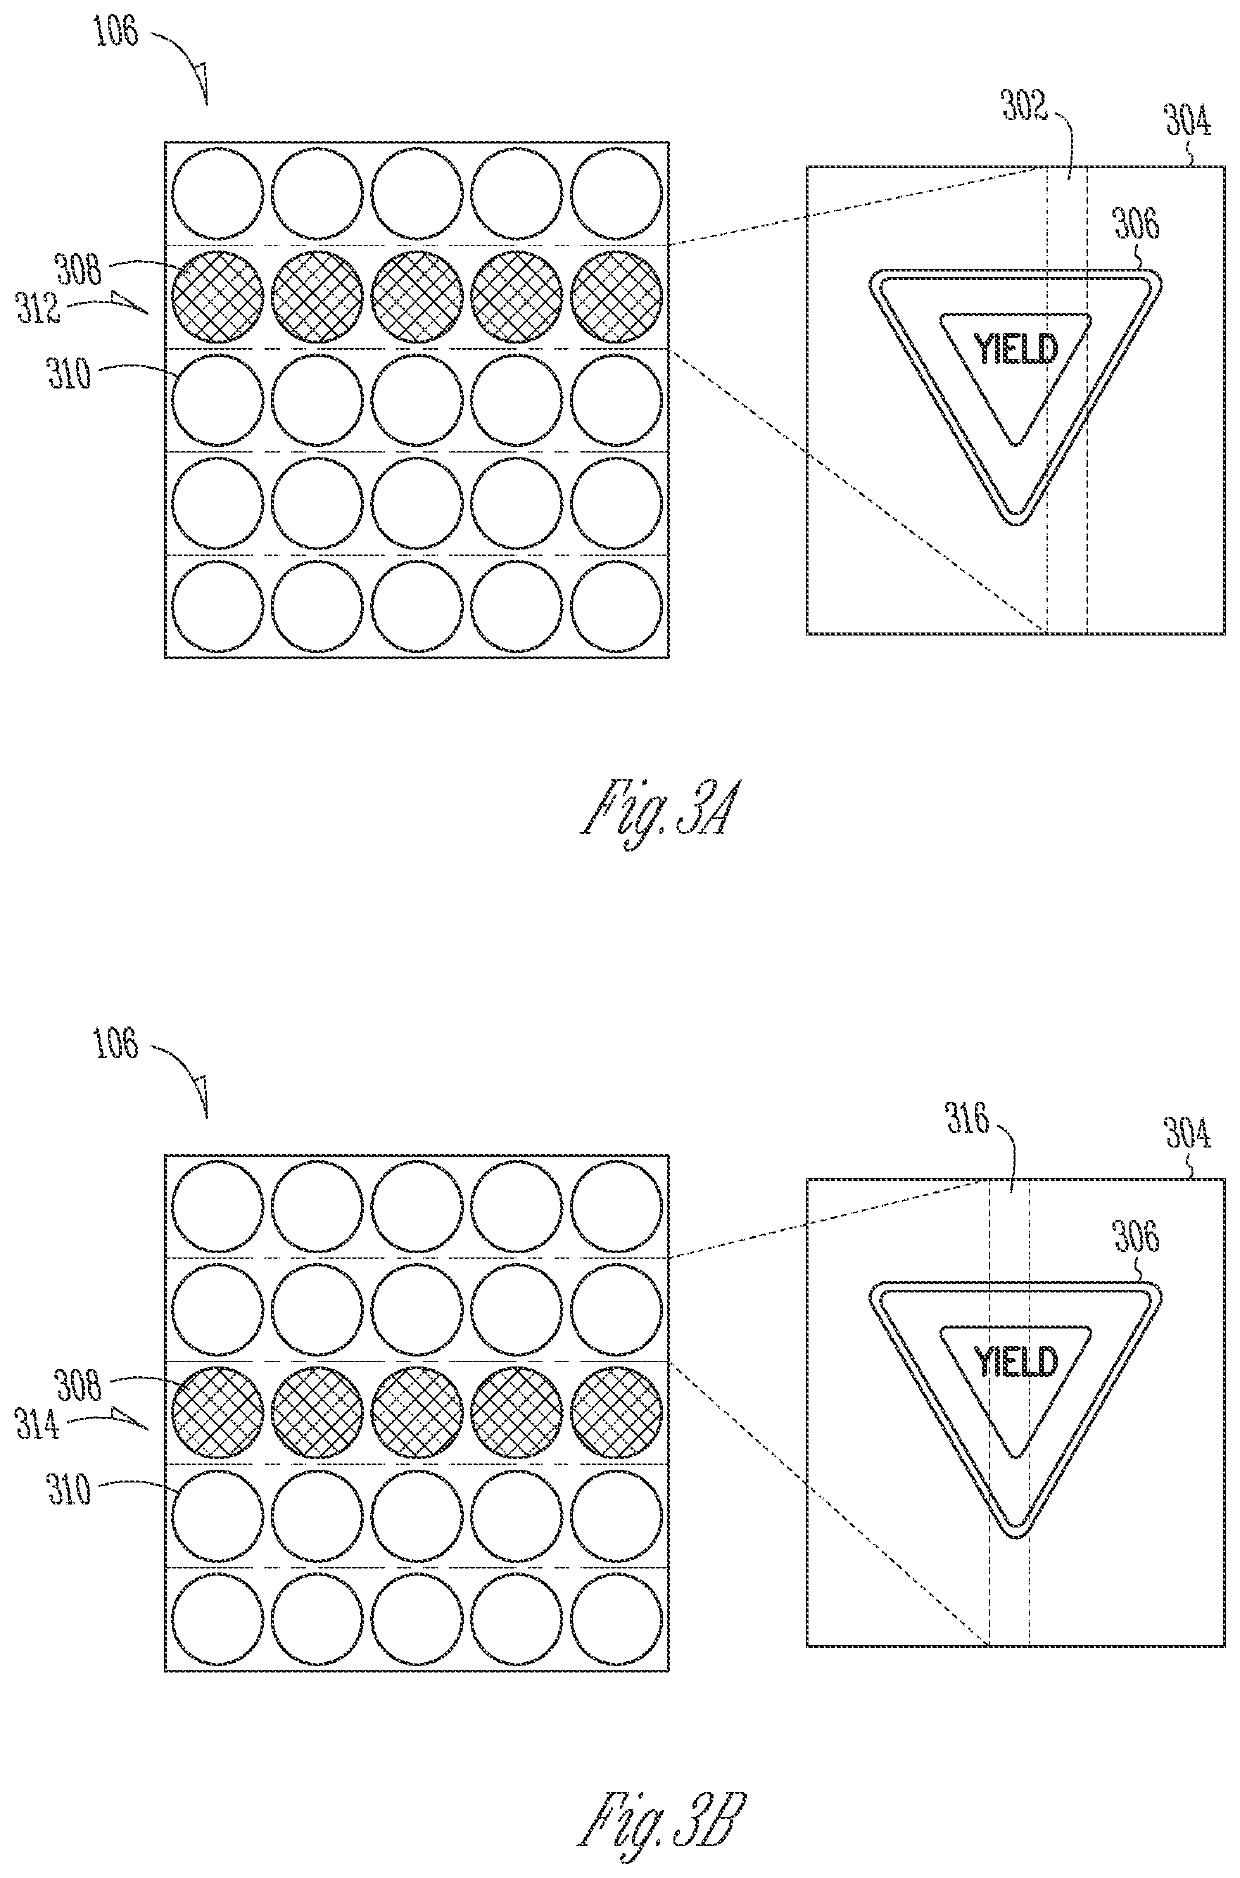 Optical system for object detection and location using a micro-electro-mechanical system (MEMS) micro-mirror array (MMA) beamsteering device